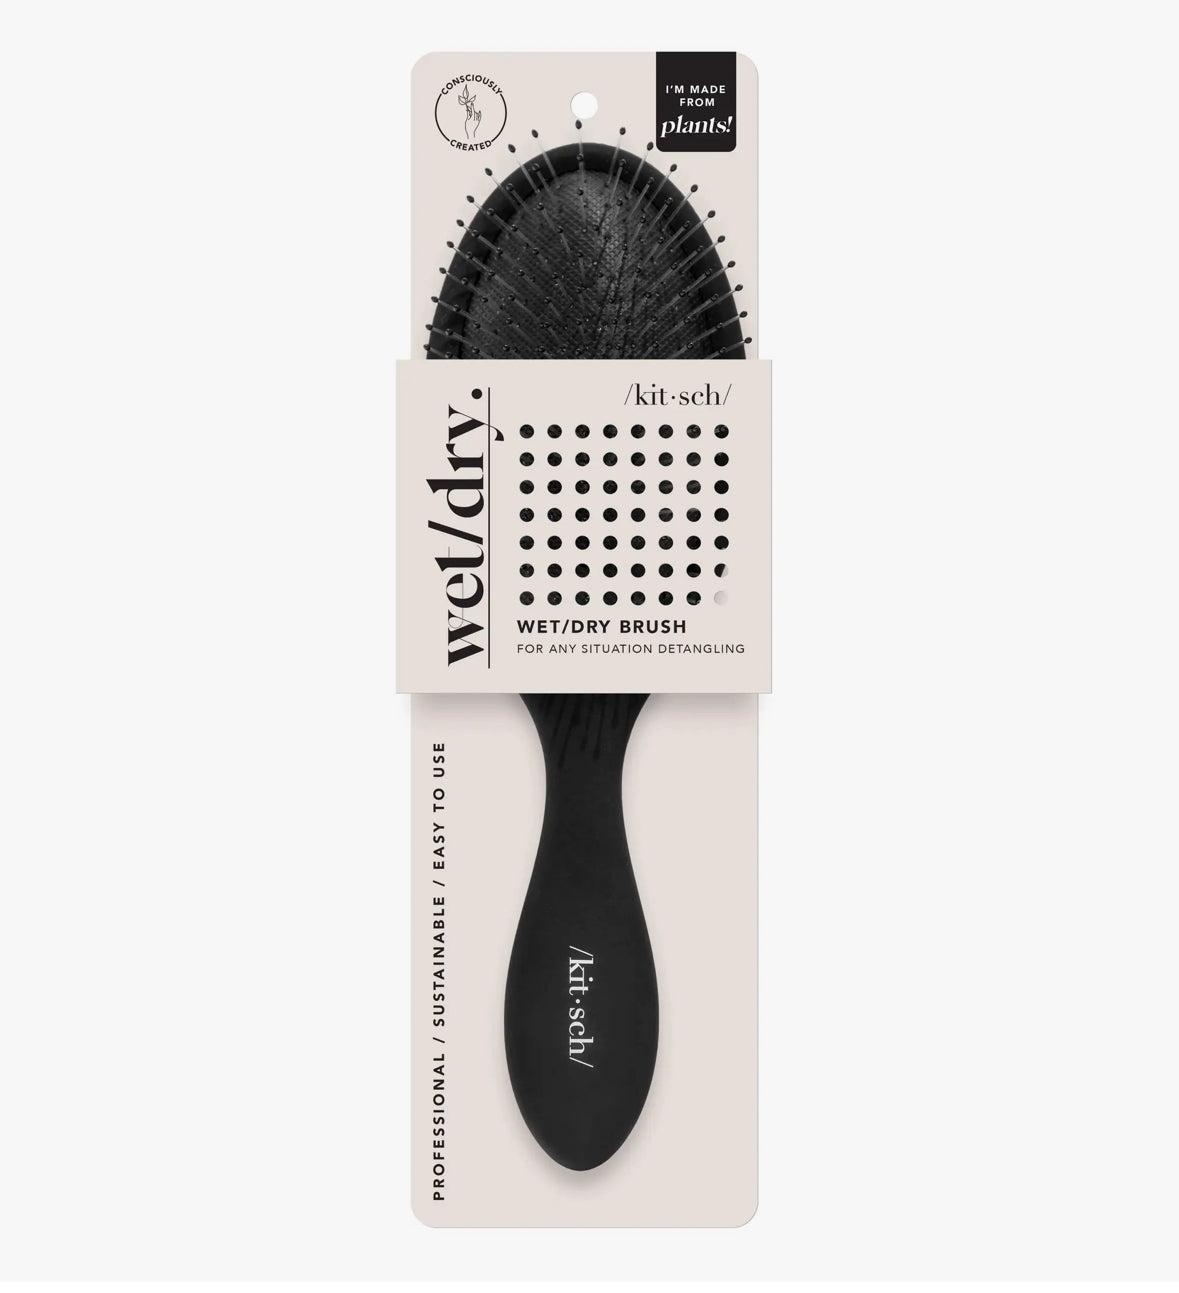 KITSCH WET/DRY BRUSH IN RECYCLED PLASTIC